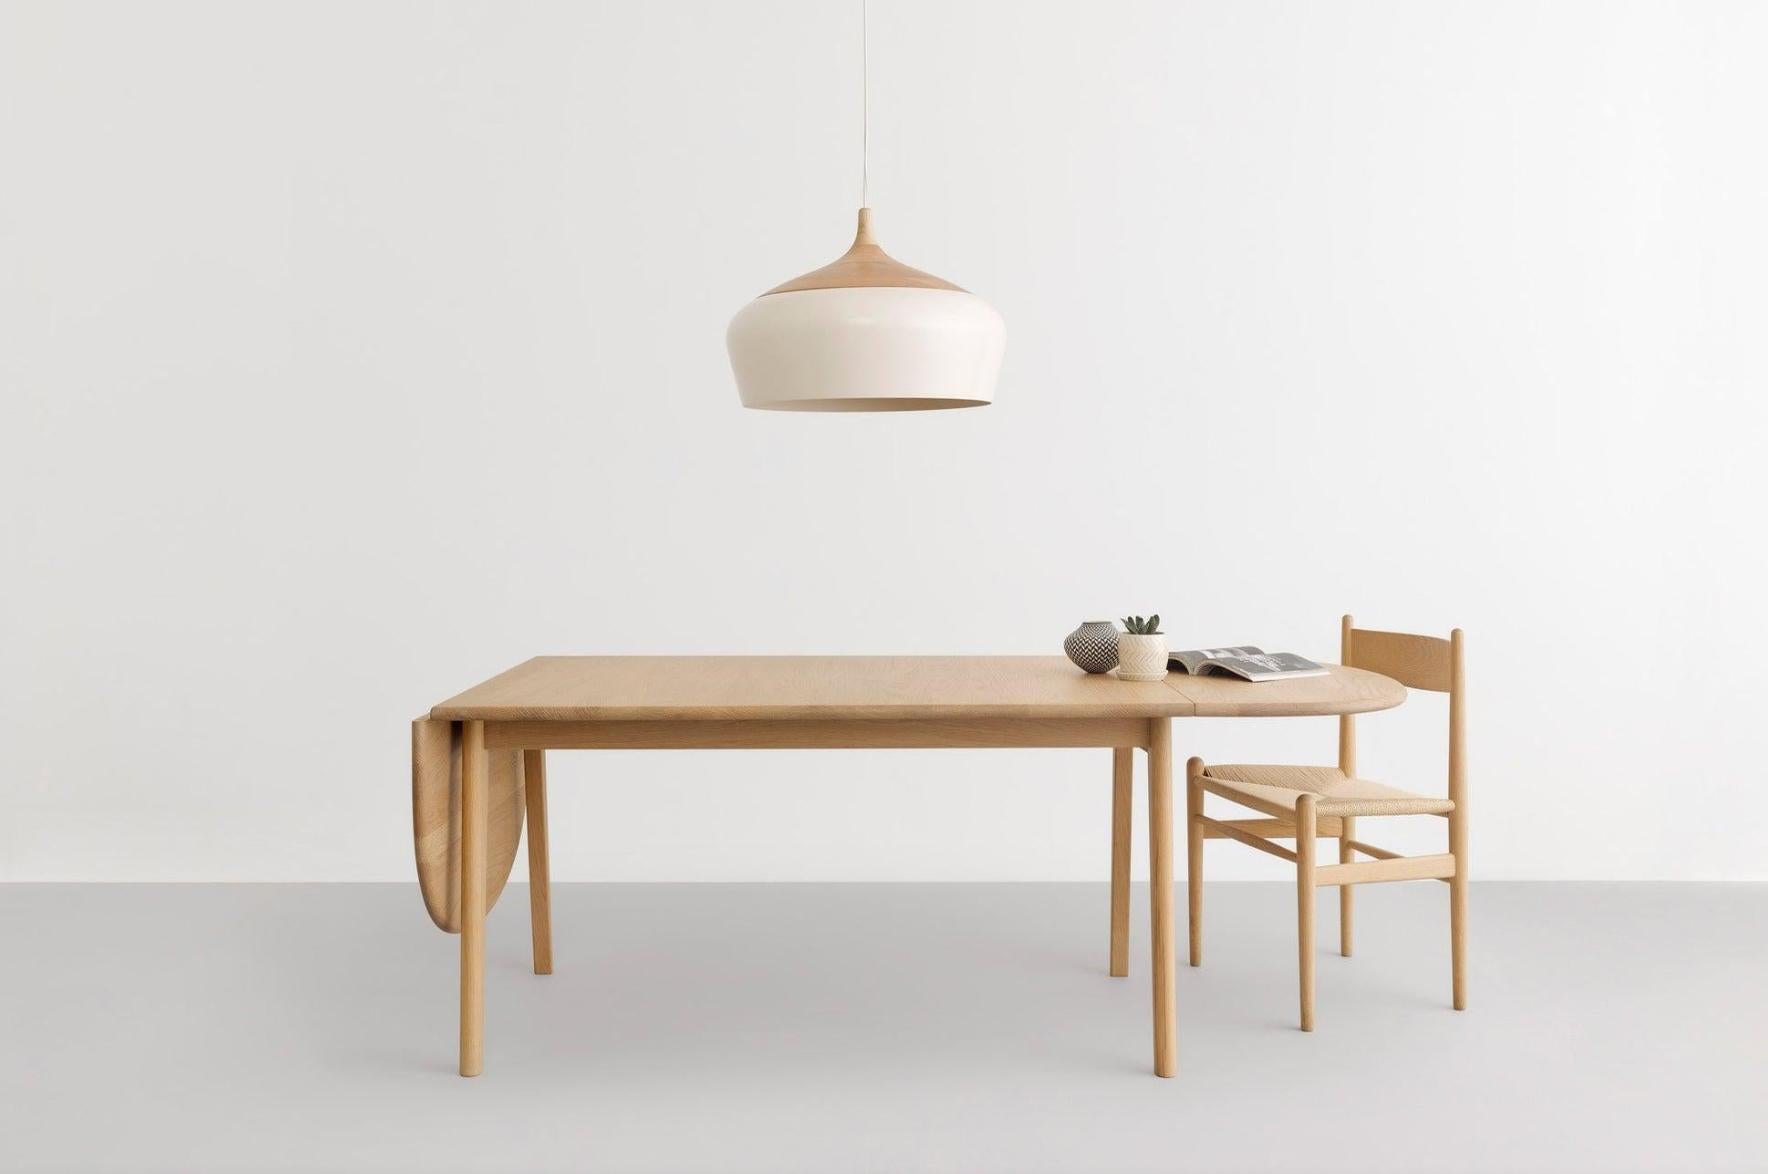 Influenced by Scandinavian and Japanese aesthetics, Coco's hand-turned victorian ash top holds its spun white, powder coat aluminum shade. Like a beautiful, heavy yo-yo at the end of its string, Coco hangs in space with a silent poise. Do as the